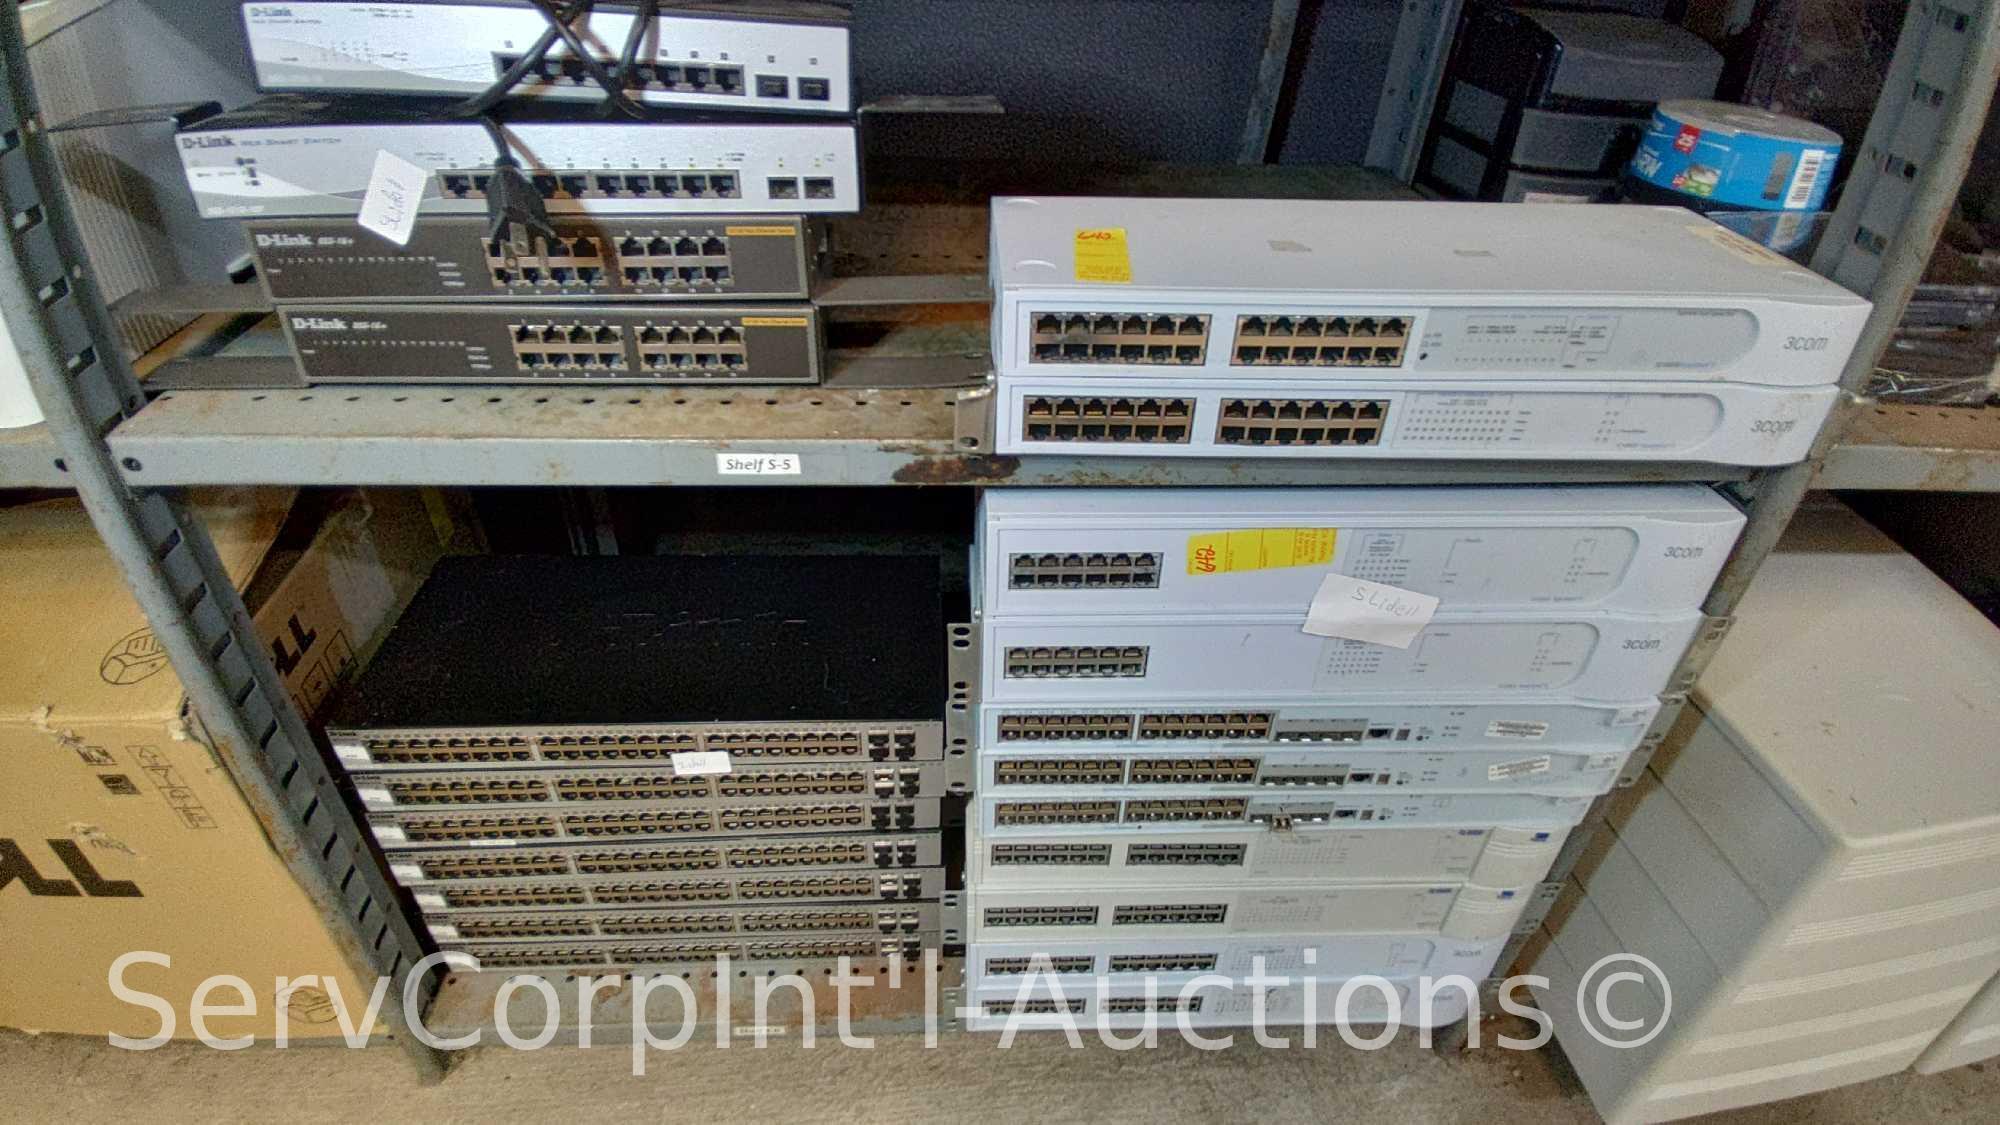 Lot on 5 Shelves of Various Network Switches: Fortinet, D-Link, Avaya, Dell Sonicwall, Nortel, 3Com